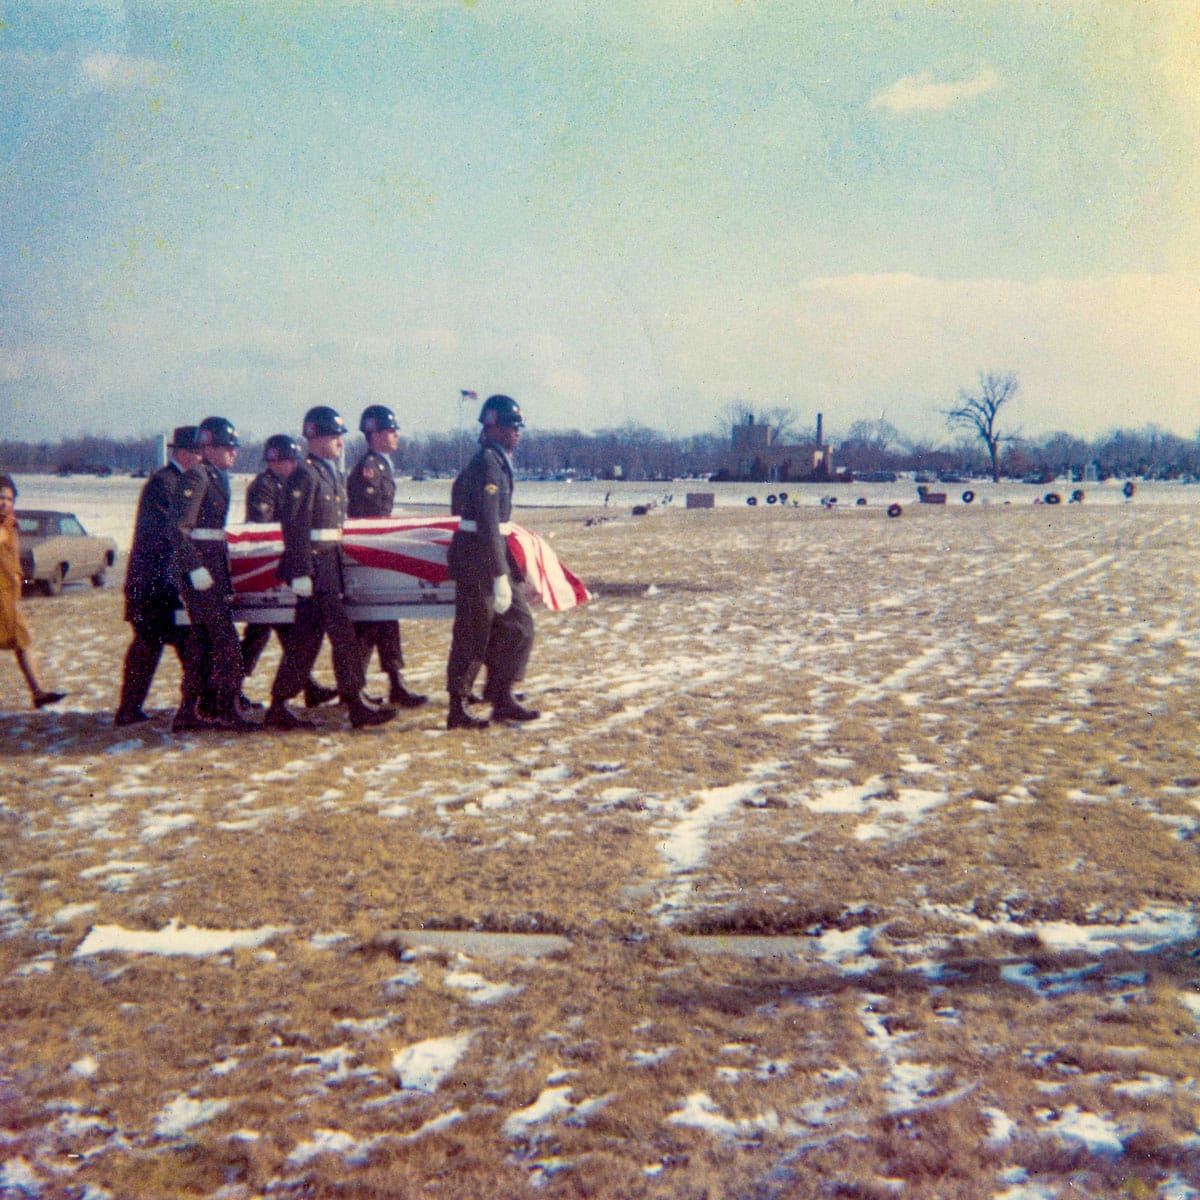 Soldiers carrying casket across field with snow